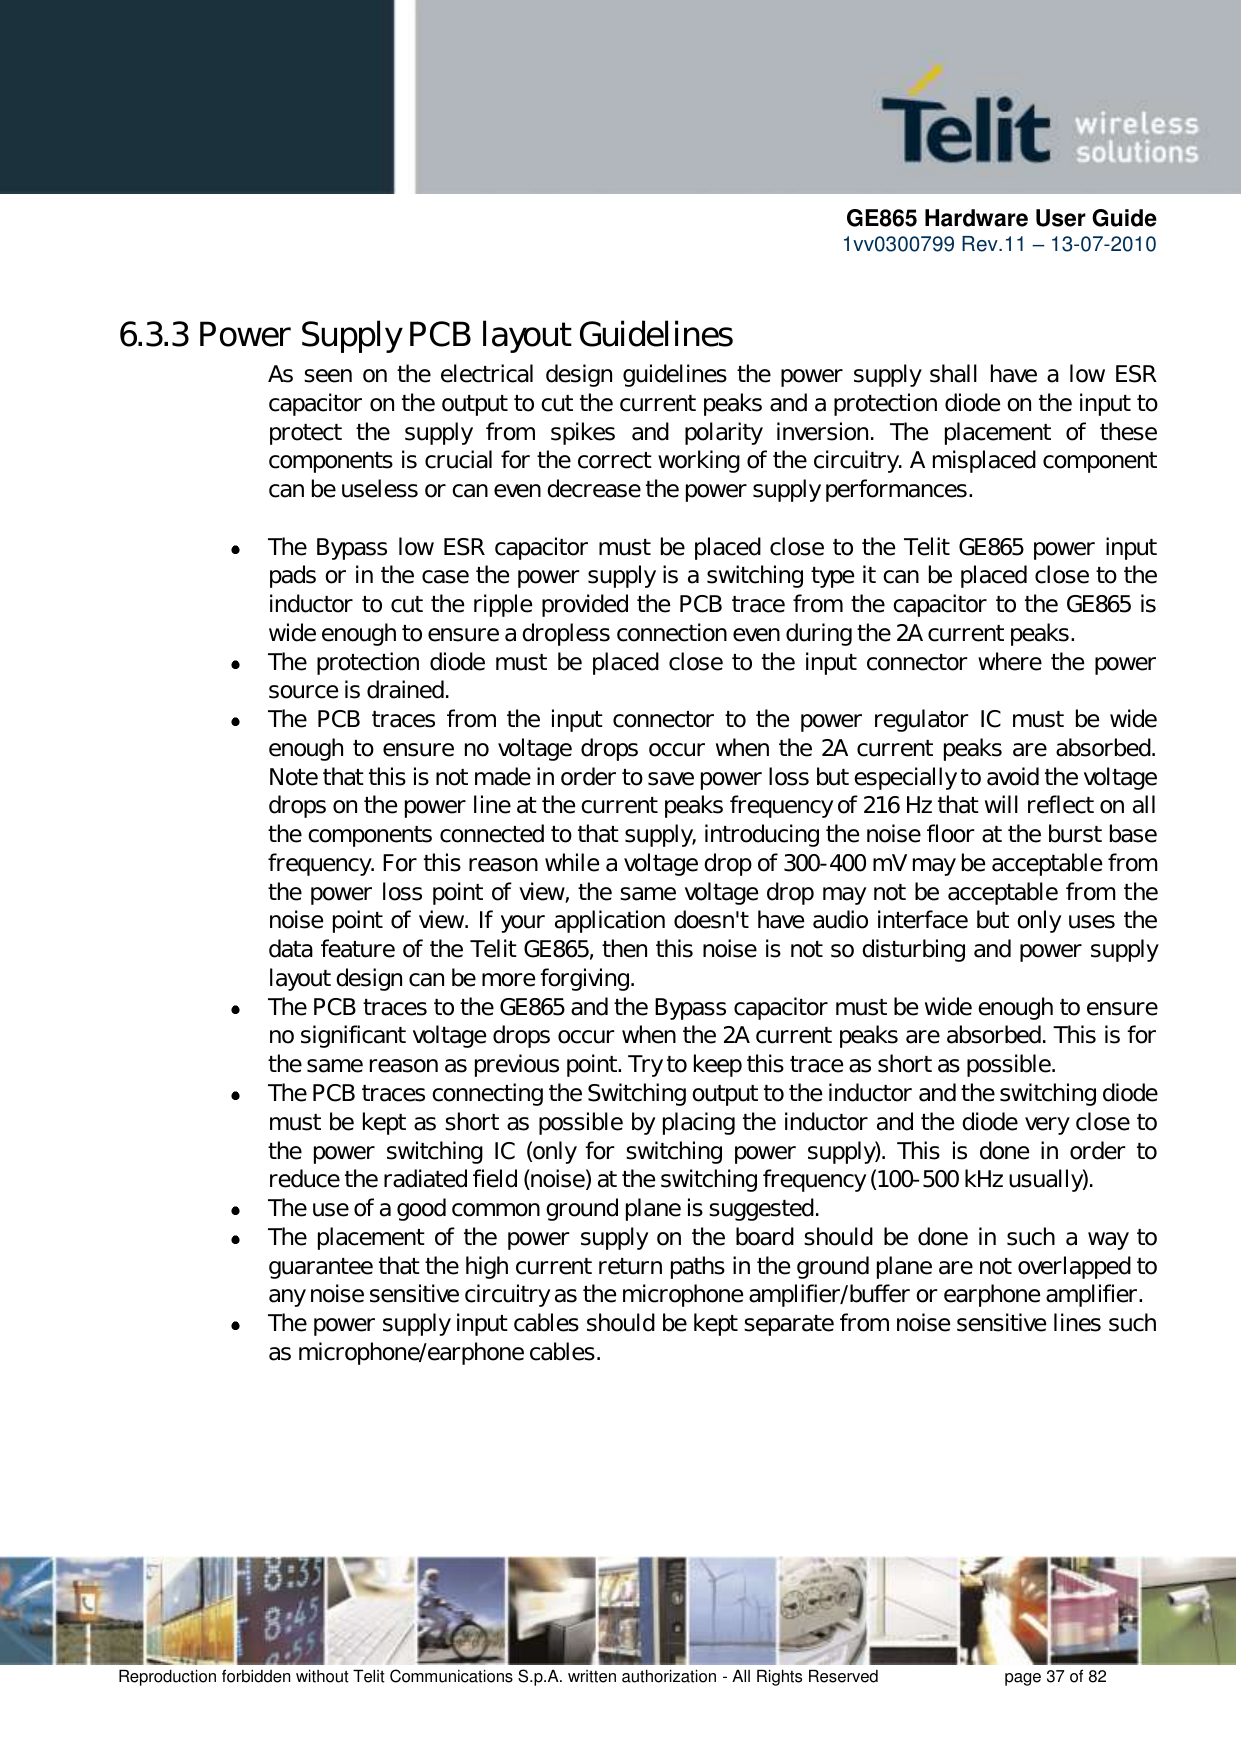      GE865 Hardware User Guide 1vv0300799 Rev.11 – 13-07-2010       Reproduction forbidden without Telit Communications S.p.A. written authorization - All Rights Reserved    page 37 of 82  6.3.3 Power Supply PCB layout Guidelines As seen on the electrical design guidelines the power supply shall have a low ESR capacitor on the output to cut the current peaks and a protection diode on the input to protect  the  supply  from  spikes  and  polarity  inversion.  The  placement  of  these components is crucial for the correct working of the circuitry. A misplaced component can be useless or can even decrease the power supply performances.   The Bypass low ESR capacitor must be placed close to the Telit GE865 power input pads or in the case the power supply is a switching type it can be placed close to the inductor to cut the ripple provided the PCB trace from the capacitor to the GE865 is wide enough to ensure a dropless connection even during the 2A current peaks.  The protection diode must be placed close to the input connector where the power source is drained.  The  PCB  traces  from  the input  connector to  the power  regulator IC  must  be  wide enough to ensure no voltage drops occur when the 2A current peaks are absorbed. Note that this is not made in order to save power loss but especially to avoid the voltage drops on the power line at the current peaks frequency of 216 Hz that will reflect on all the components connected to that supply, introducing the noise floor at the burst base frequency. For this reason while a voltage drop of 300-400 mV may be acceptable from the power loss point of view, the same voltage drop may not be acceptable from the noise point of view. If your application doesn&apos;t have audio interface but only uses the data feature of the Telit GE865, then this noise is not so disturbing and power supply layout design can be more forgiving.  The PCB traces to the GE865 and the Bypass capacitor must be wide enough to ensure no significant voltage drops occur when the 2A current peaks are absorbed. This is for the same reason as previous point. Try to keep this trace as short as possible.  The PCB traces connecting the Switching output to the inductor and the switching diode must be kept as short as possible by placing the inductor and the diode very close to the  power  switching  IC  (only  for  switching  power supply).  This  is  done  in  order  to reduce the radiated field (noise) at the switching frequency (100-500 kHz usually).  The use of a good common ground plane is suggested.  The placement of the power supply on  the board should be done in such a way to guarantee that the high current return paths in the ground plane are not overlapped to any noise sensitive circuitry as the microphone amplifier/buffer or earphone amplifier.  The power supply input cables should be kept separate from noise sensitive lines such as microphone/earphone cables.      